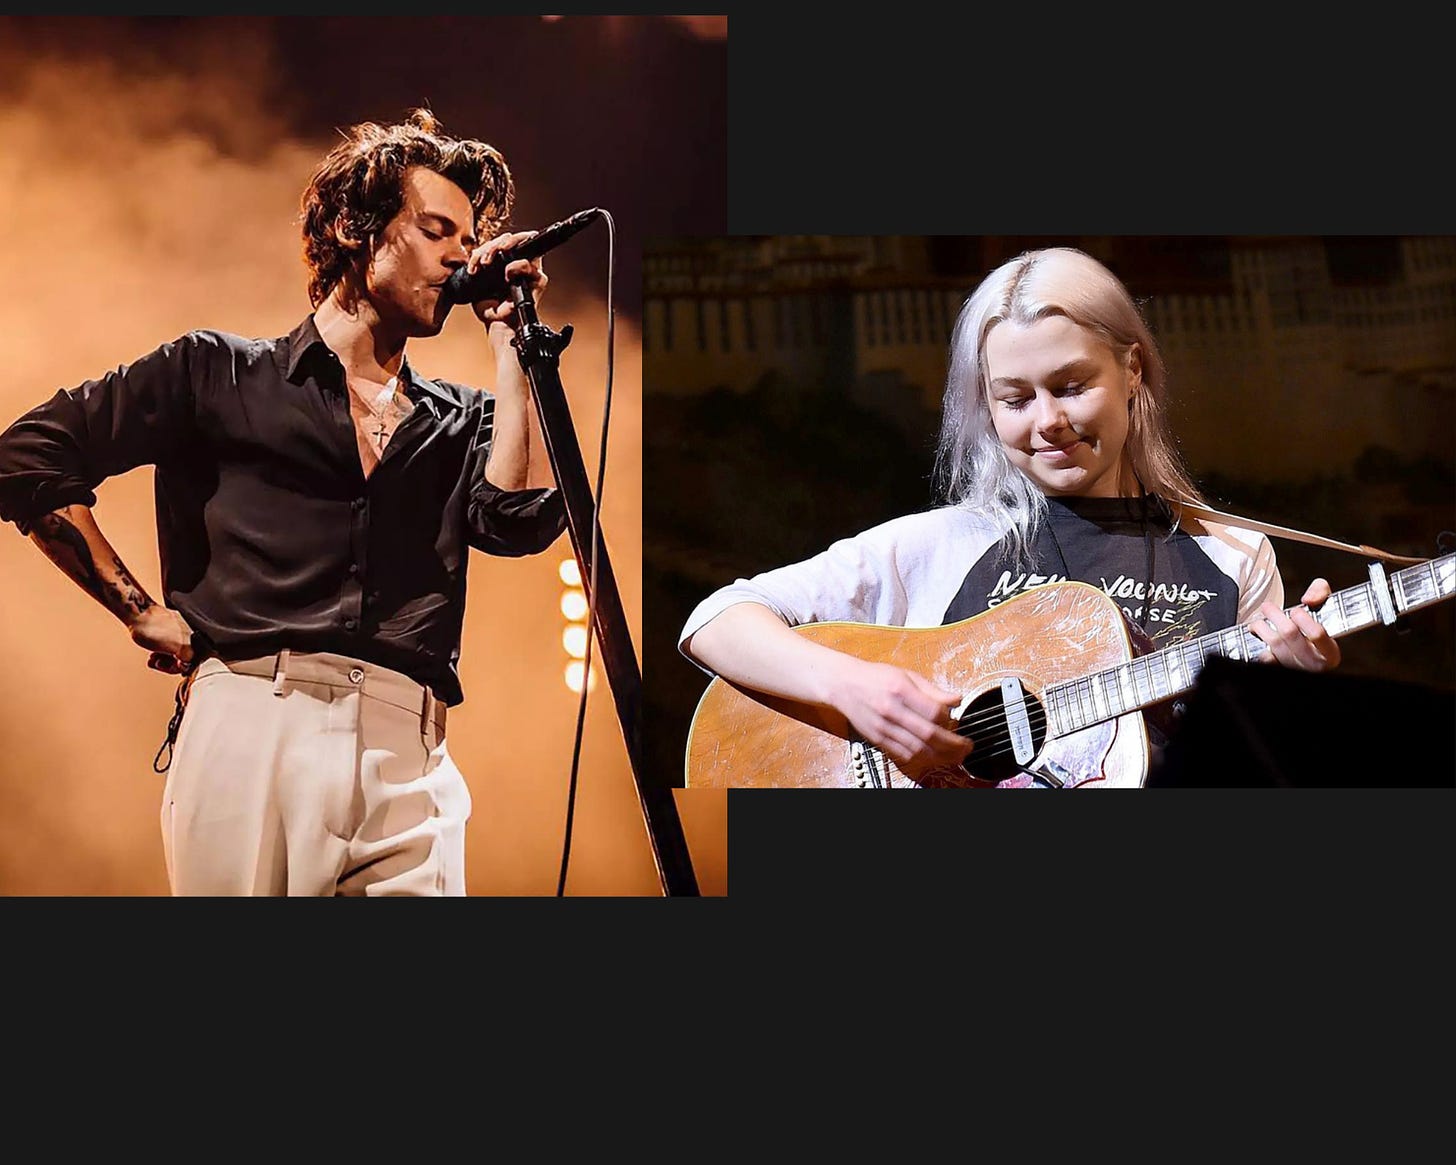 Photos of Harry Styles and Phoebe Bridgers performing and looking fine as hell